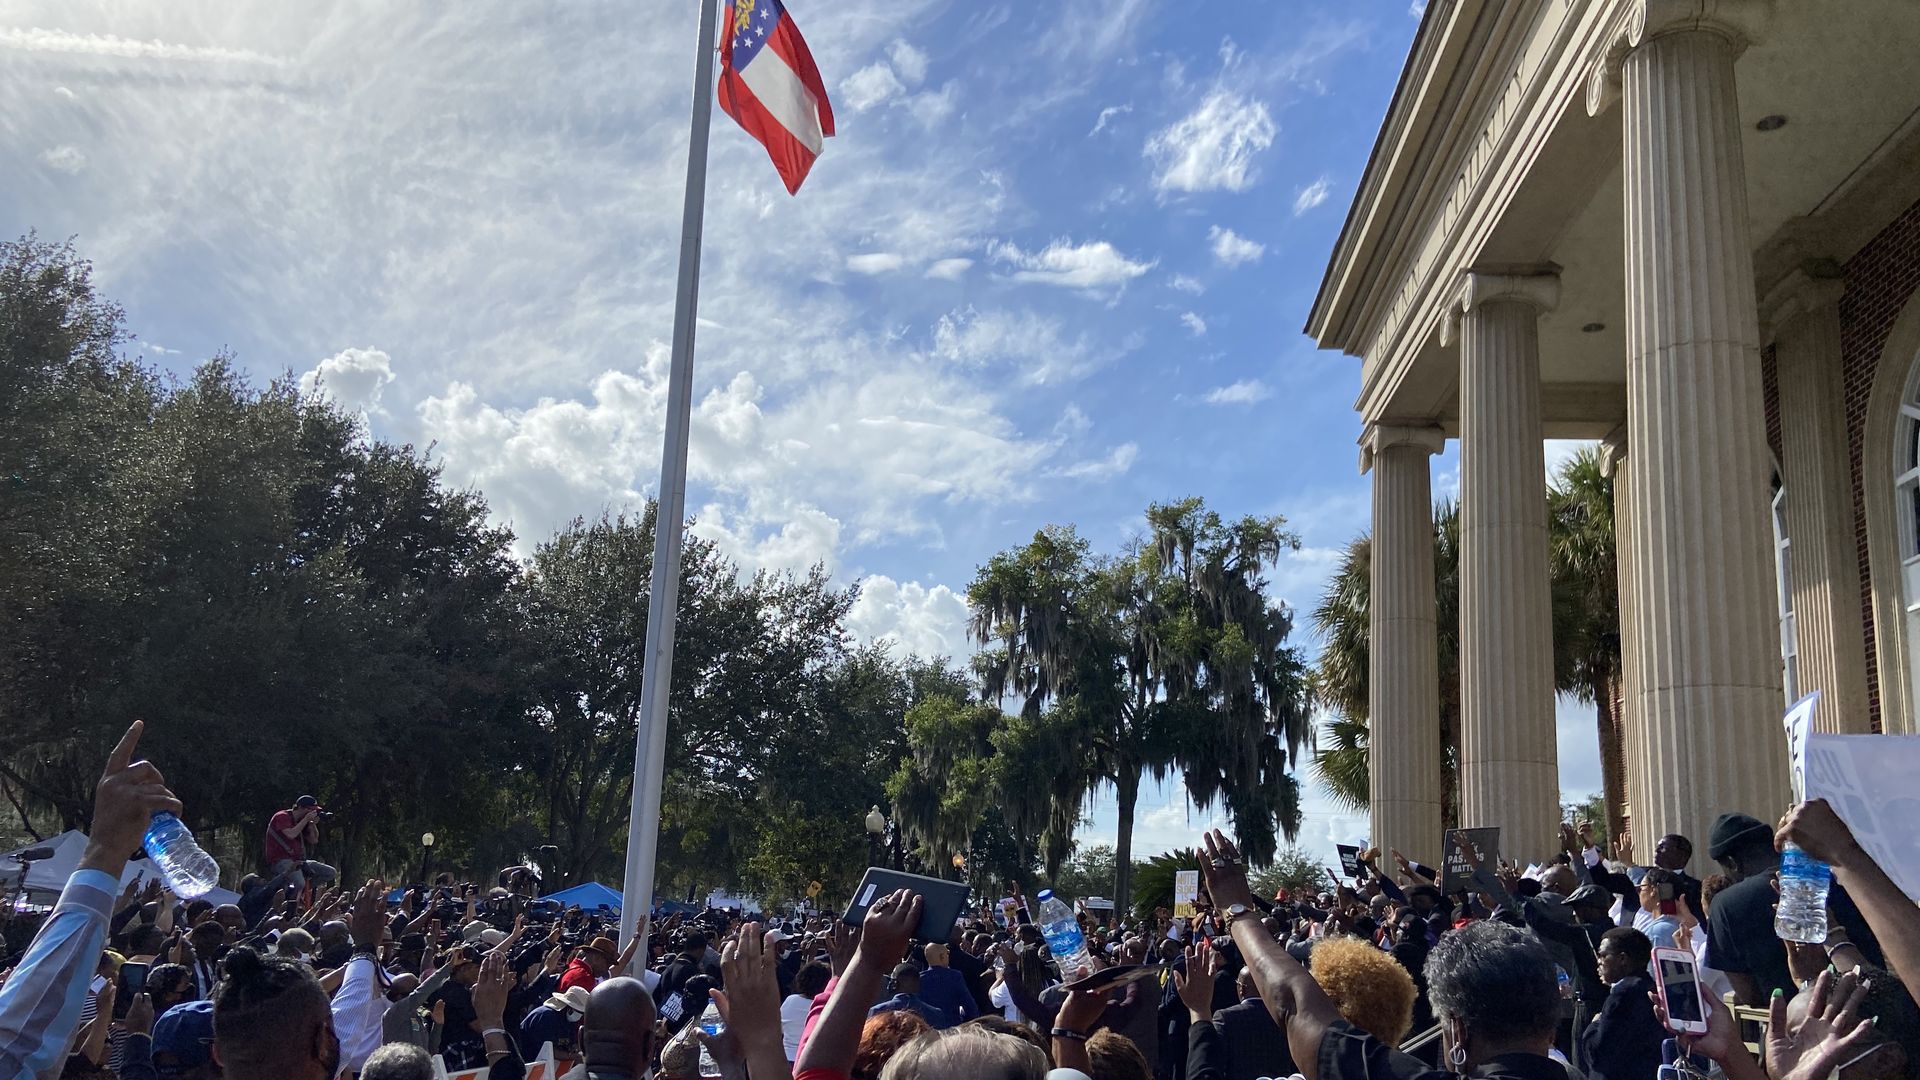 Crowd in front of courthouse